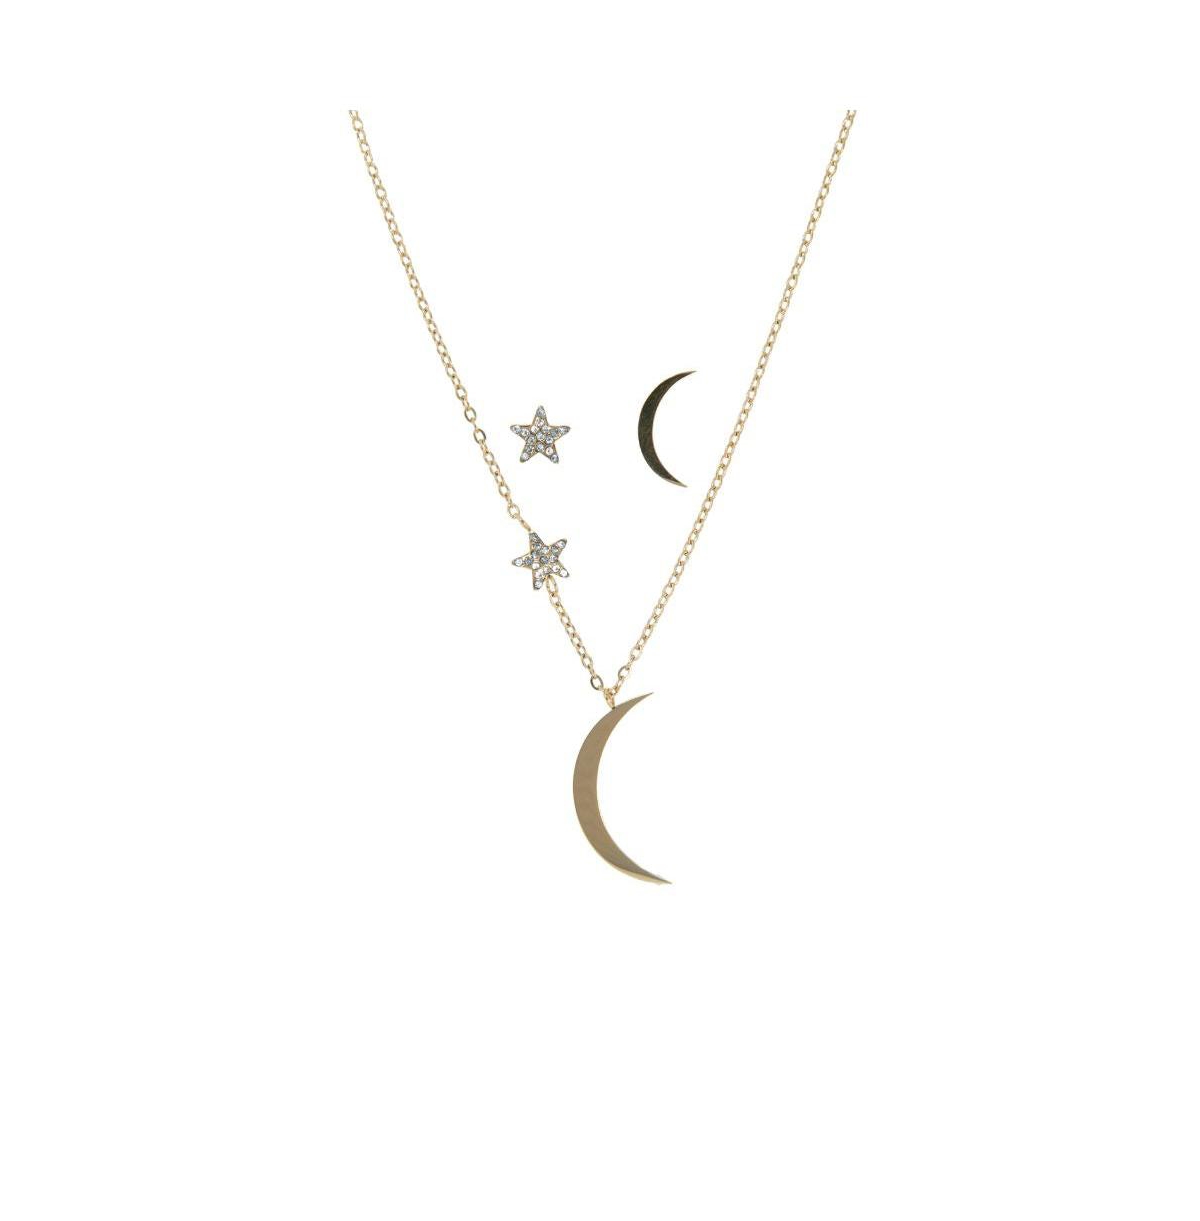 316L Minimalist Gold/Silver Tone Star & Moon Necklace and Earring Set - Silver